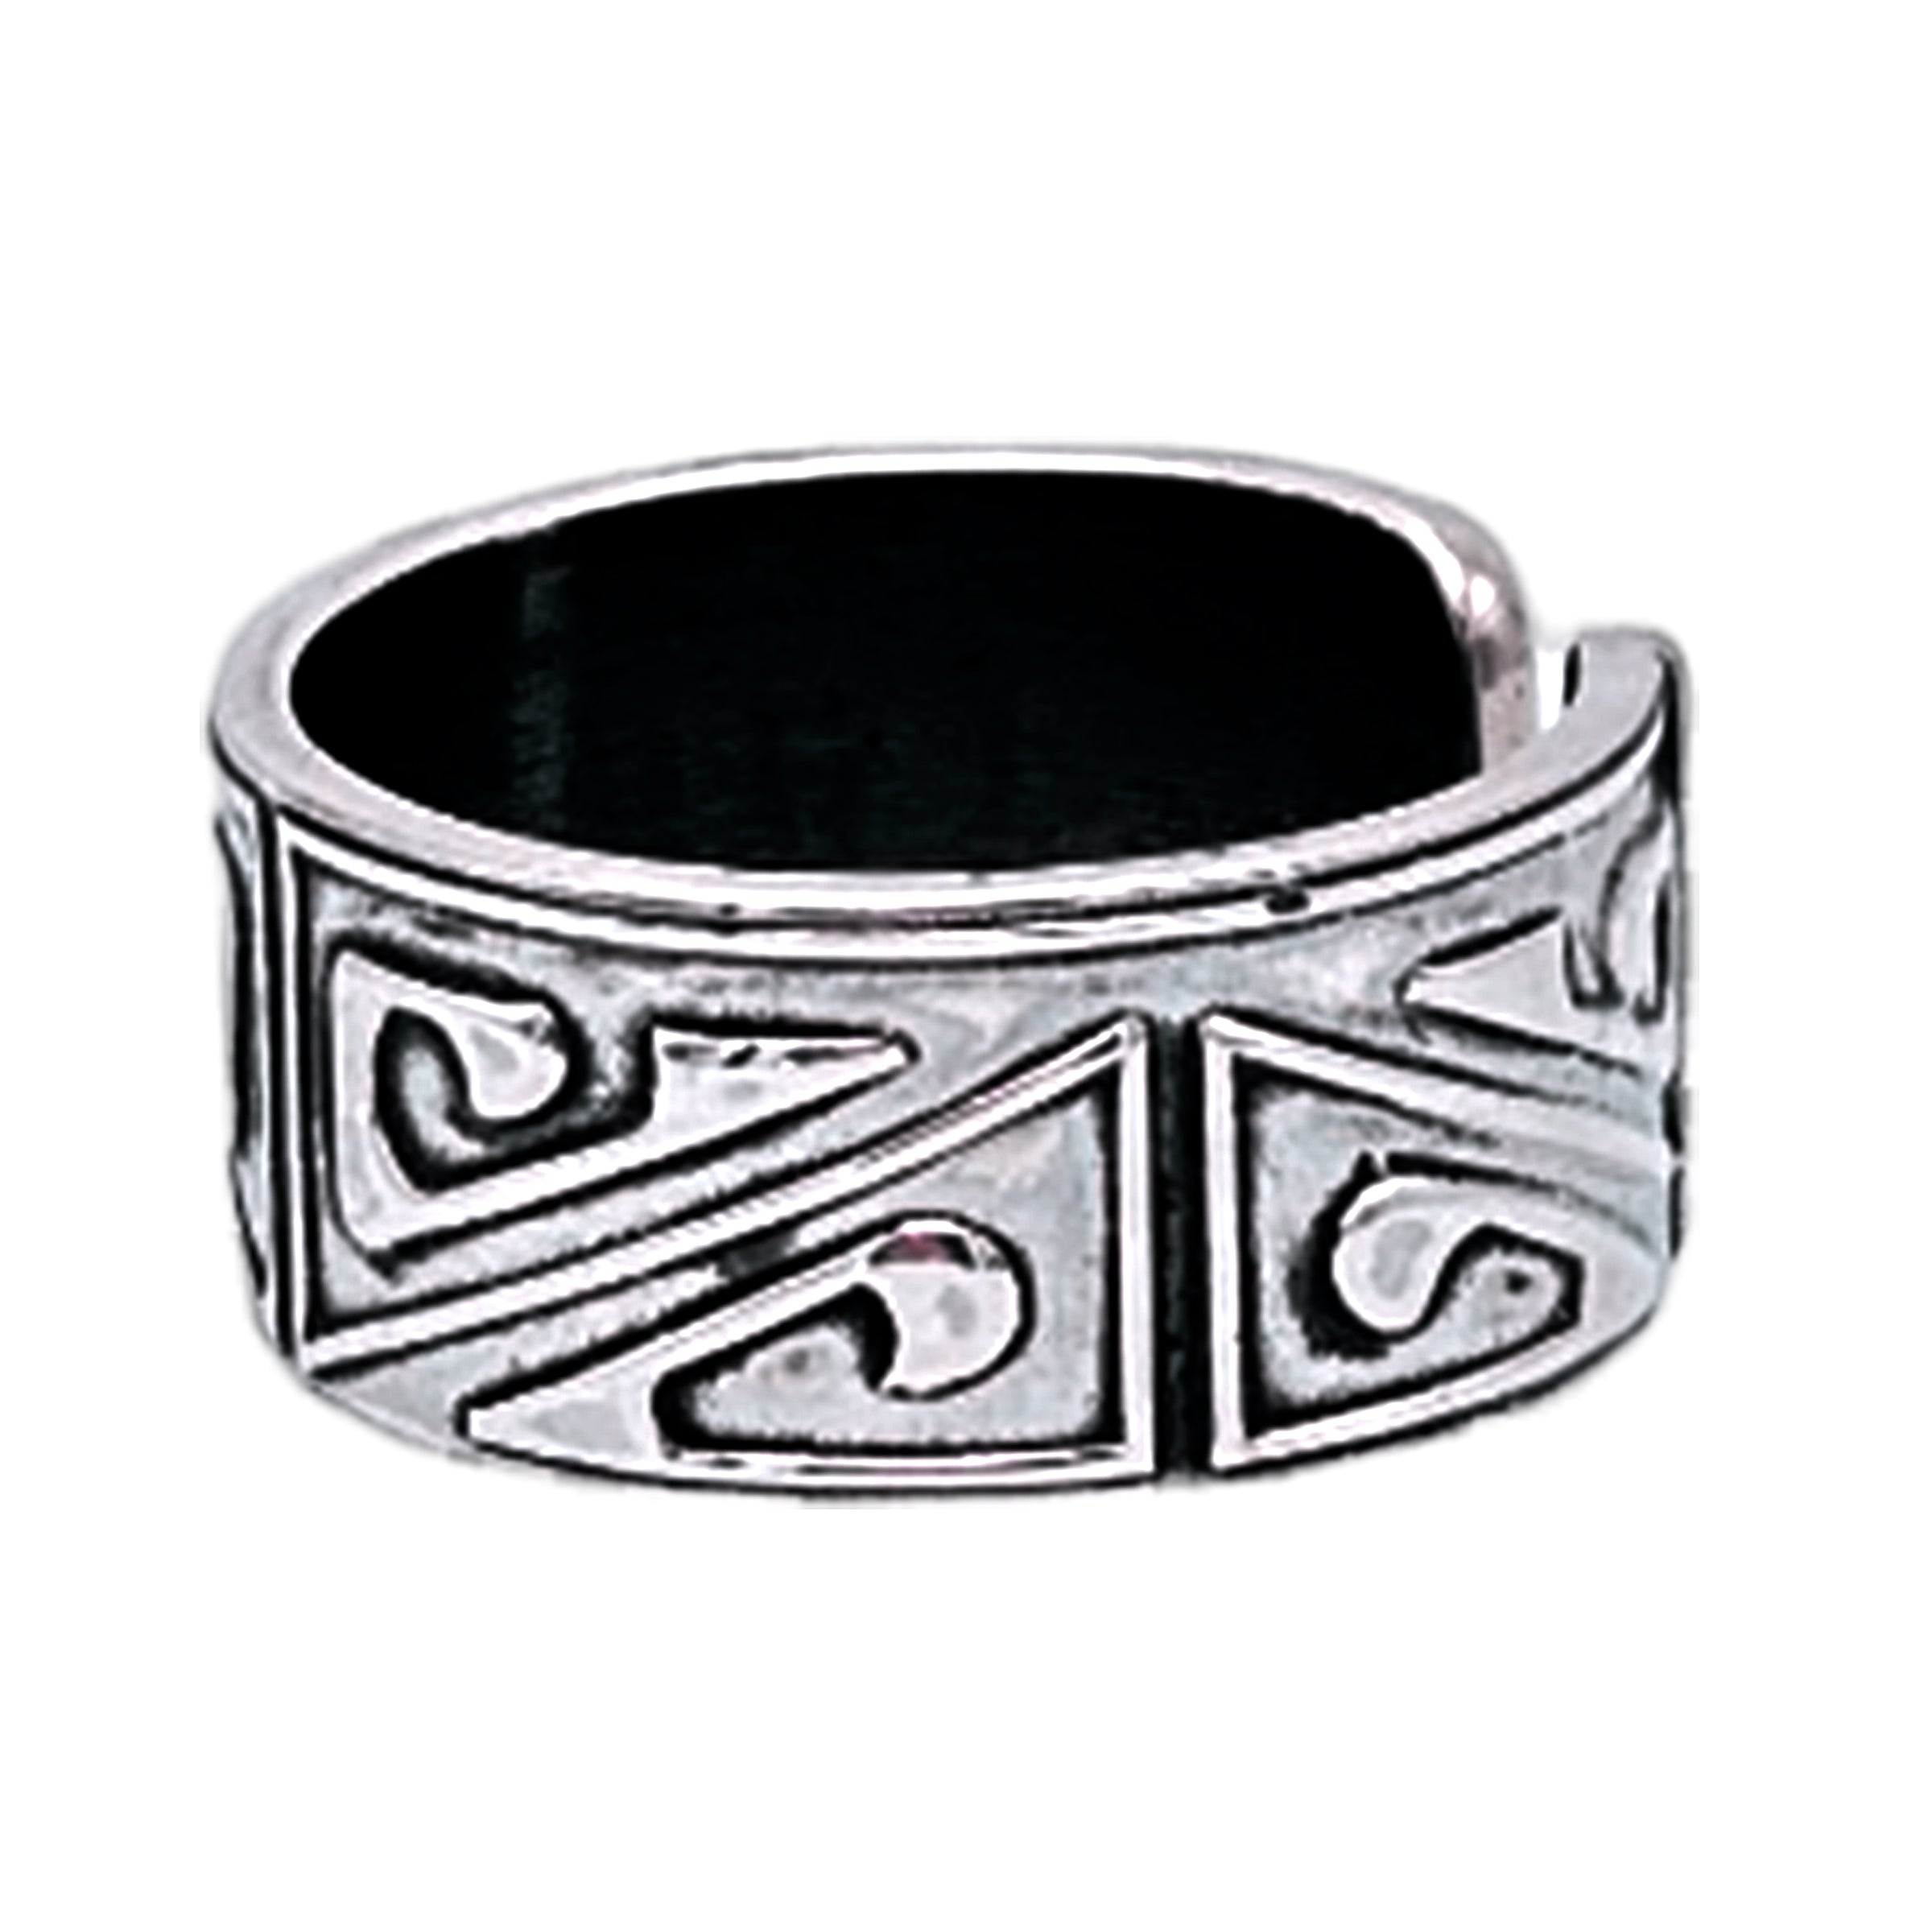 Tabra Jewelry 925 Sterling Silver Ancient Aztec Pattern Embossed Ring